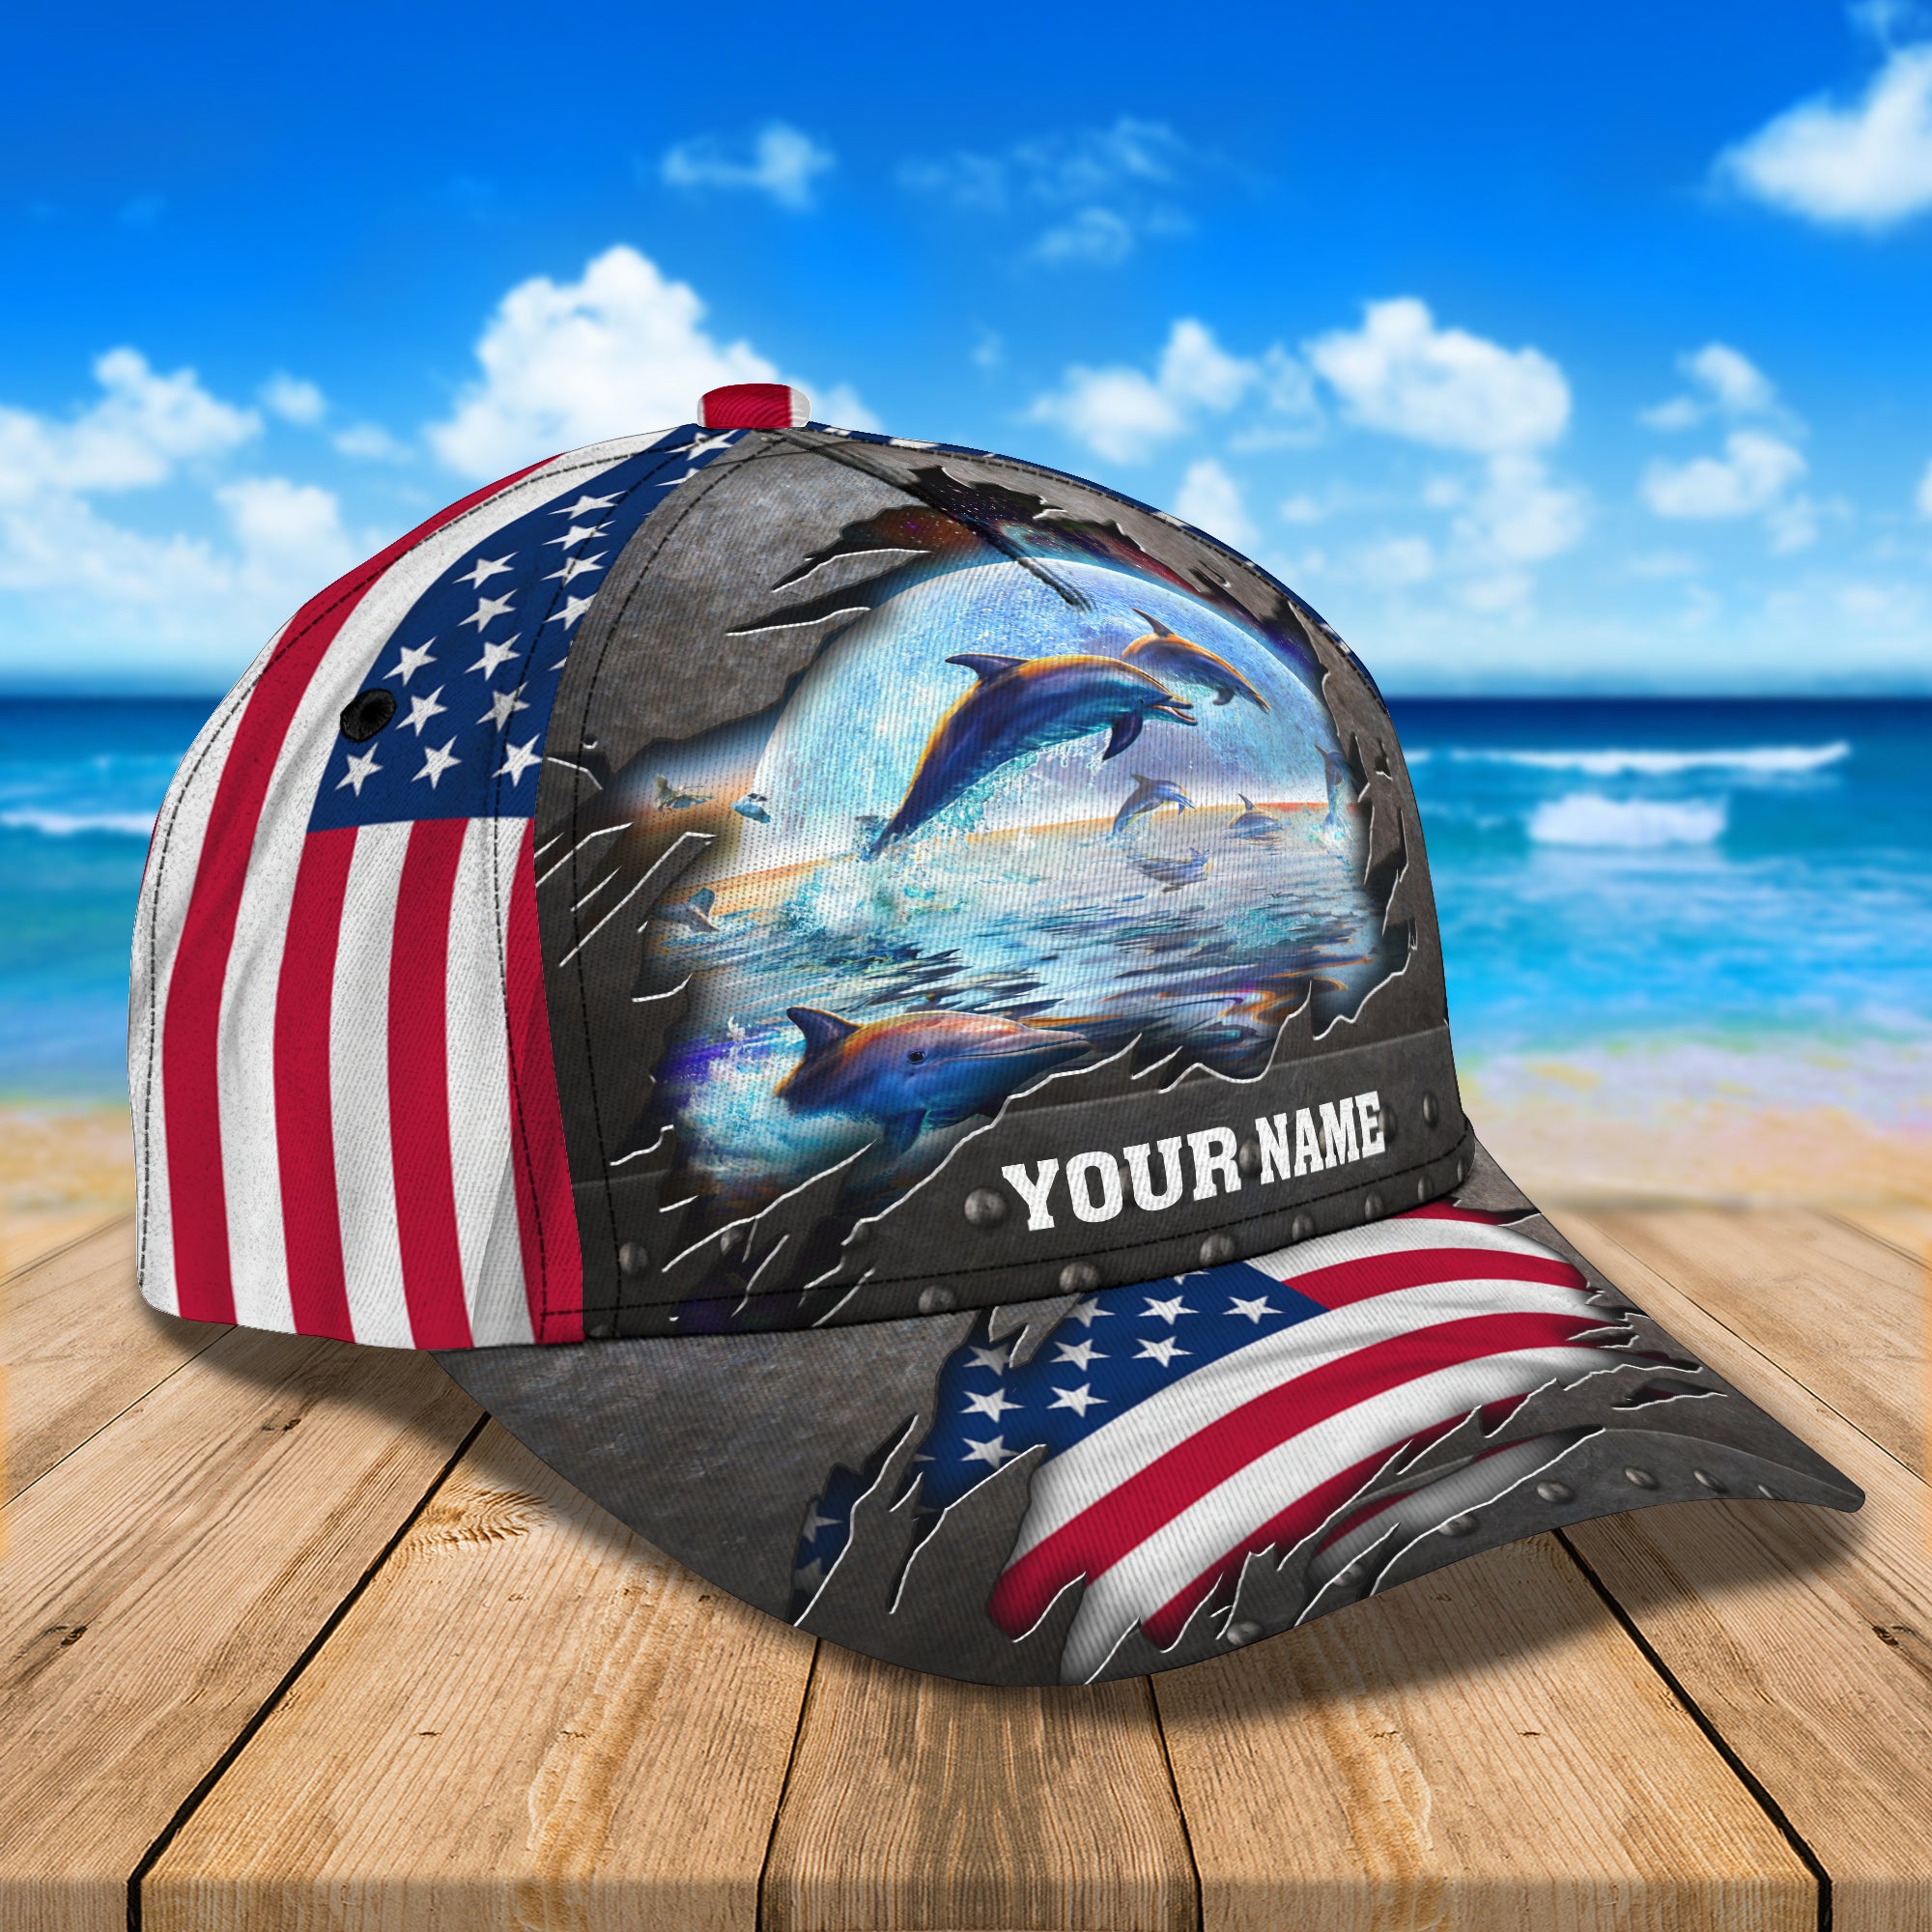 Dolphin - Personalized Name Cap - Urt96